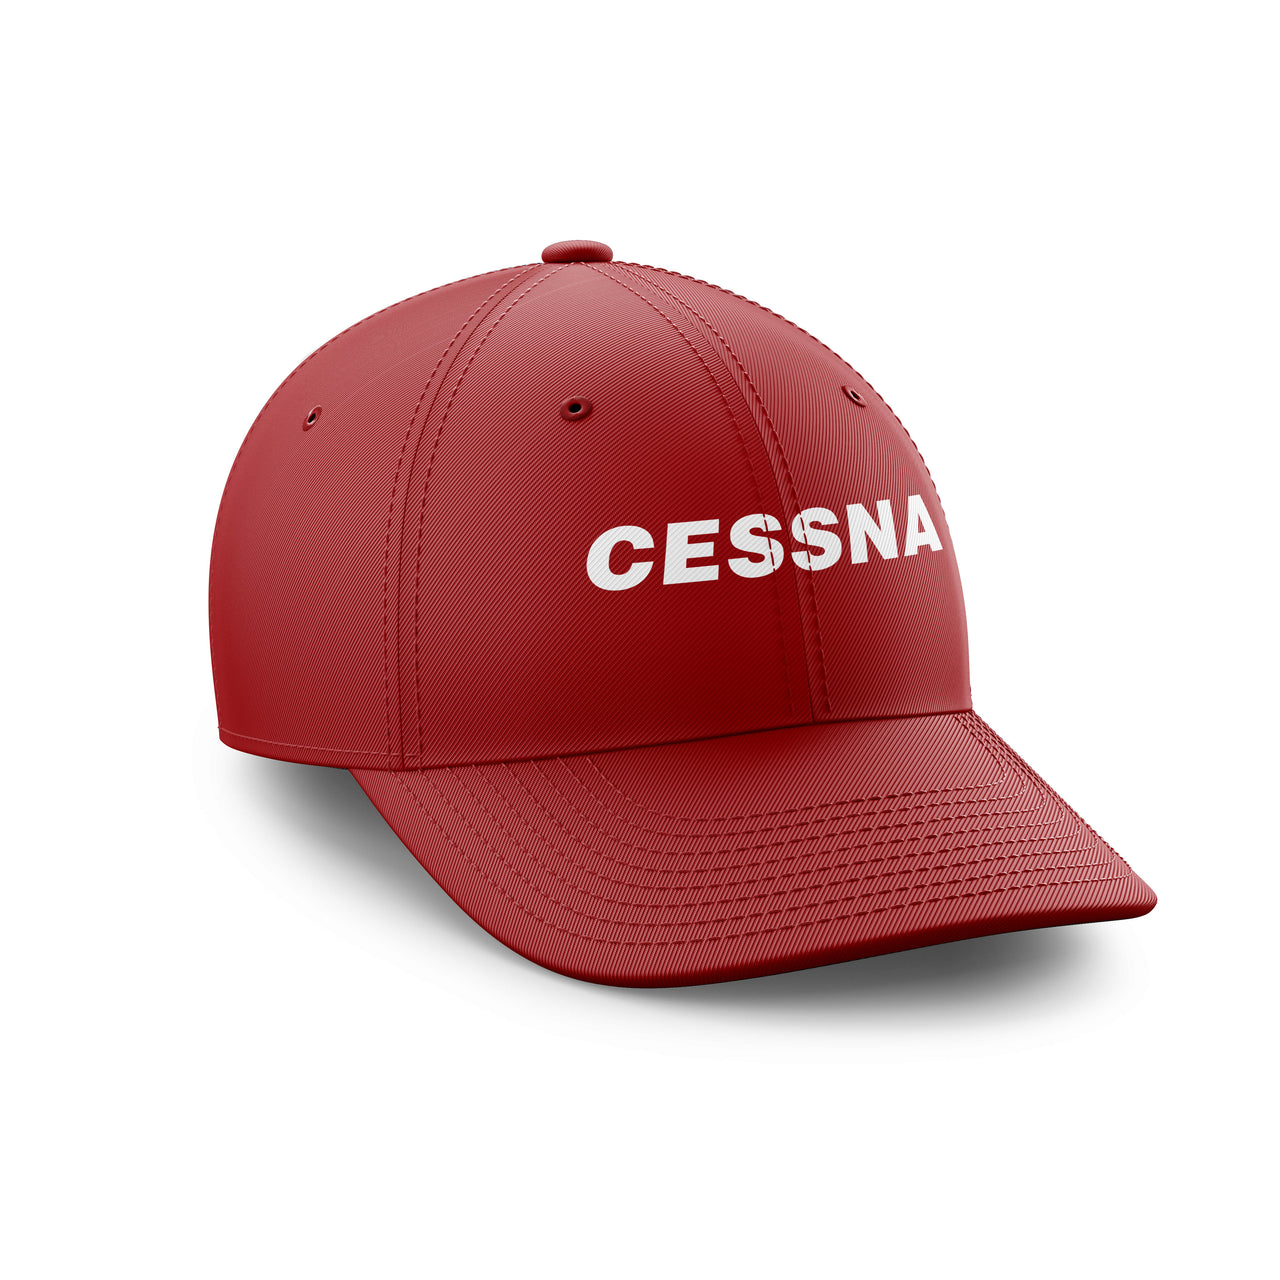 Cessna & Text Designed Embroidered Hats